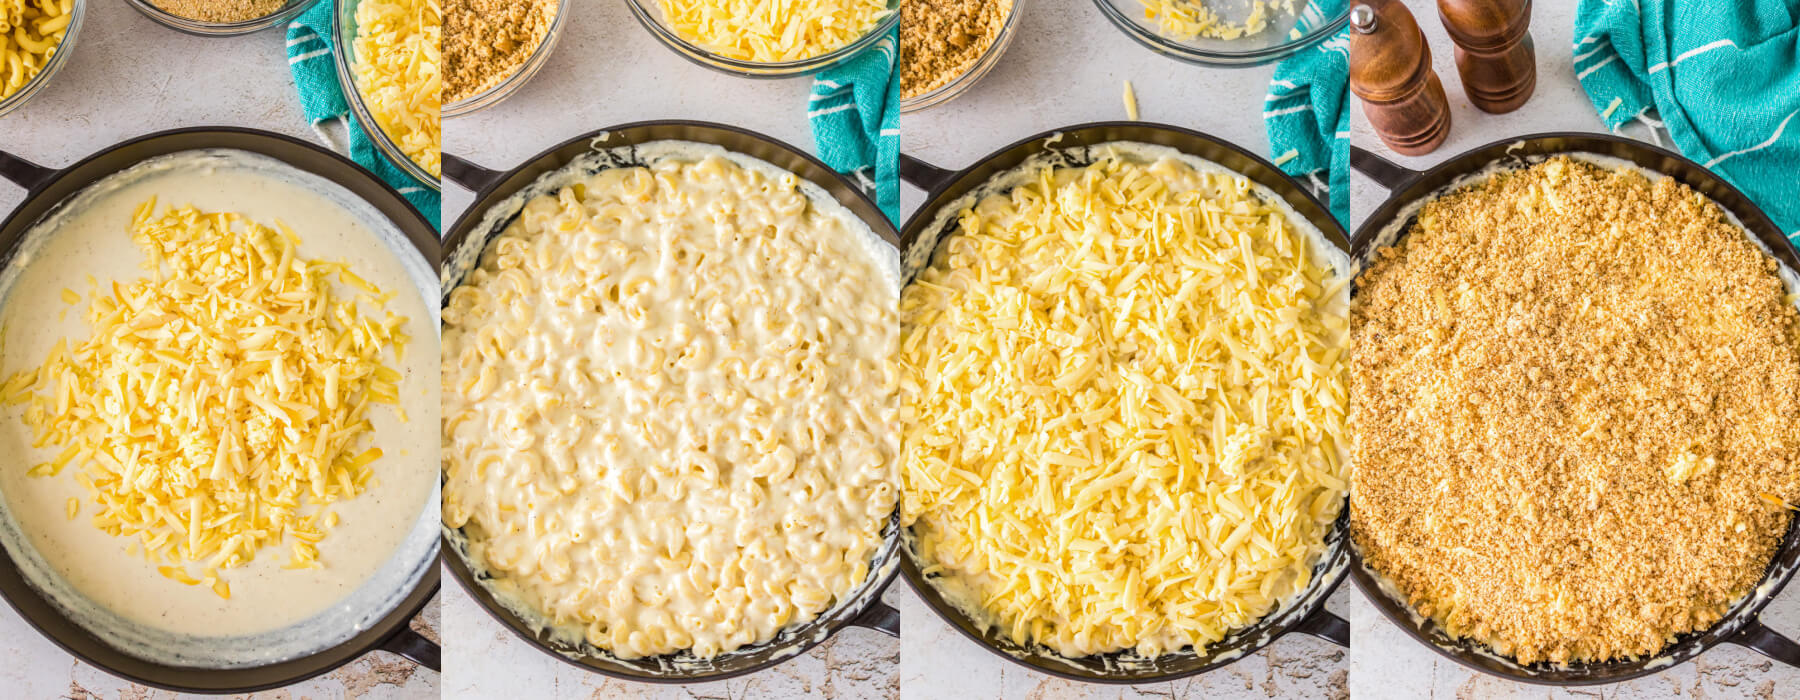 A series of process images showing how to mix pasta in cheese sauce.